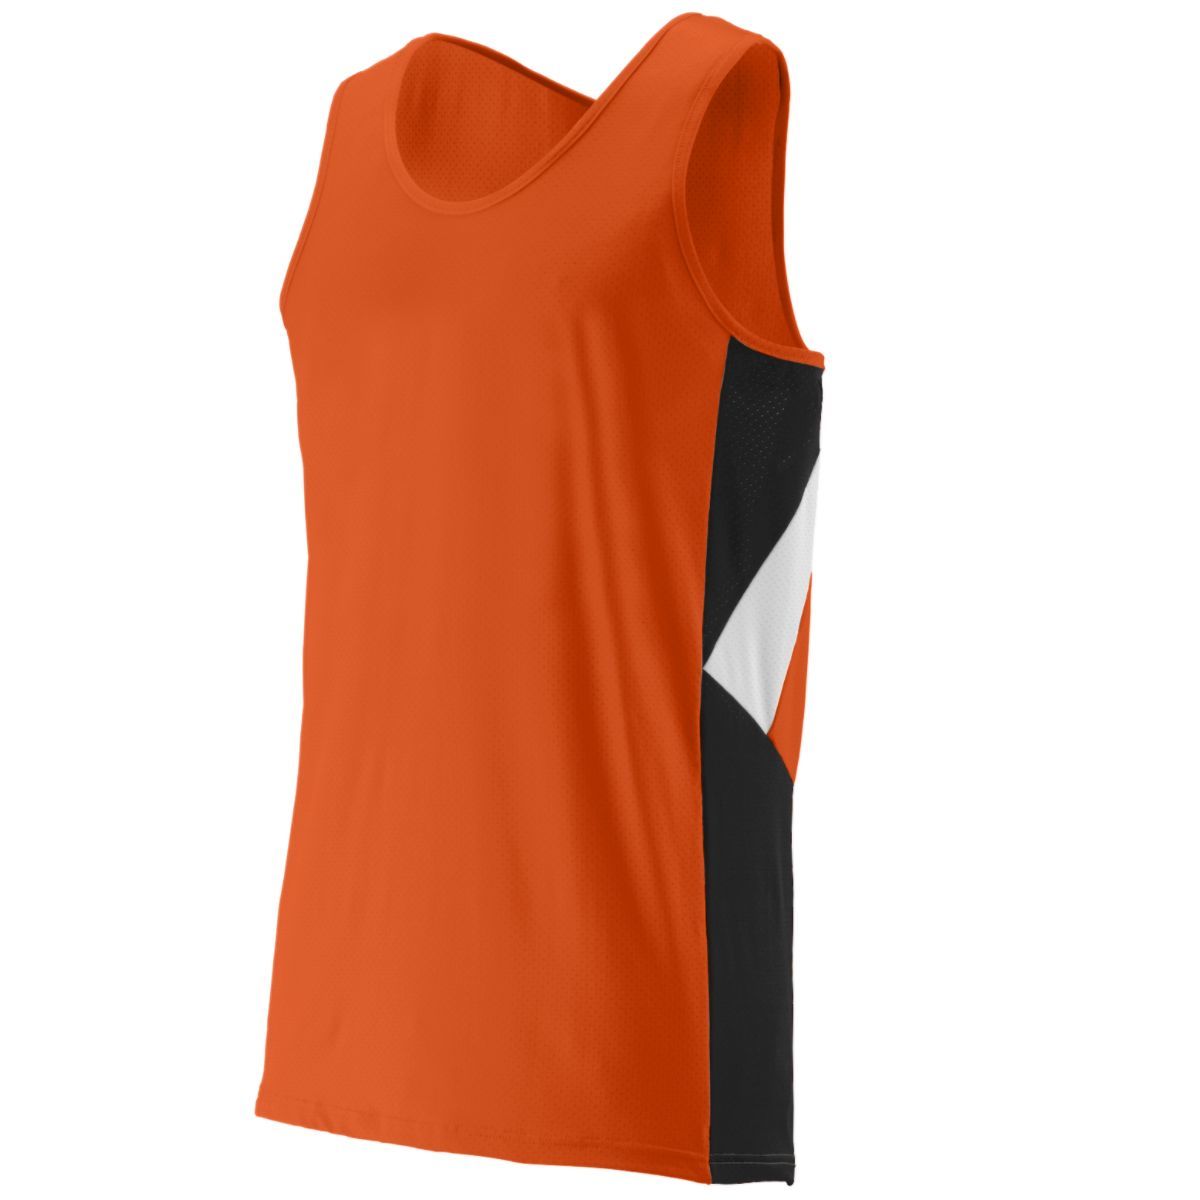 Augusta Sportswear Sprint Jersey in Orange/Black/White  -Part of the Adult, Adult-Jersey, Augusta-Products, Track-Field, Shirts product lines at KanaleyCreations.com